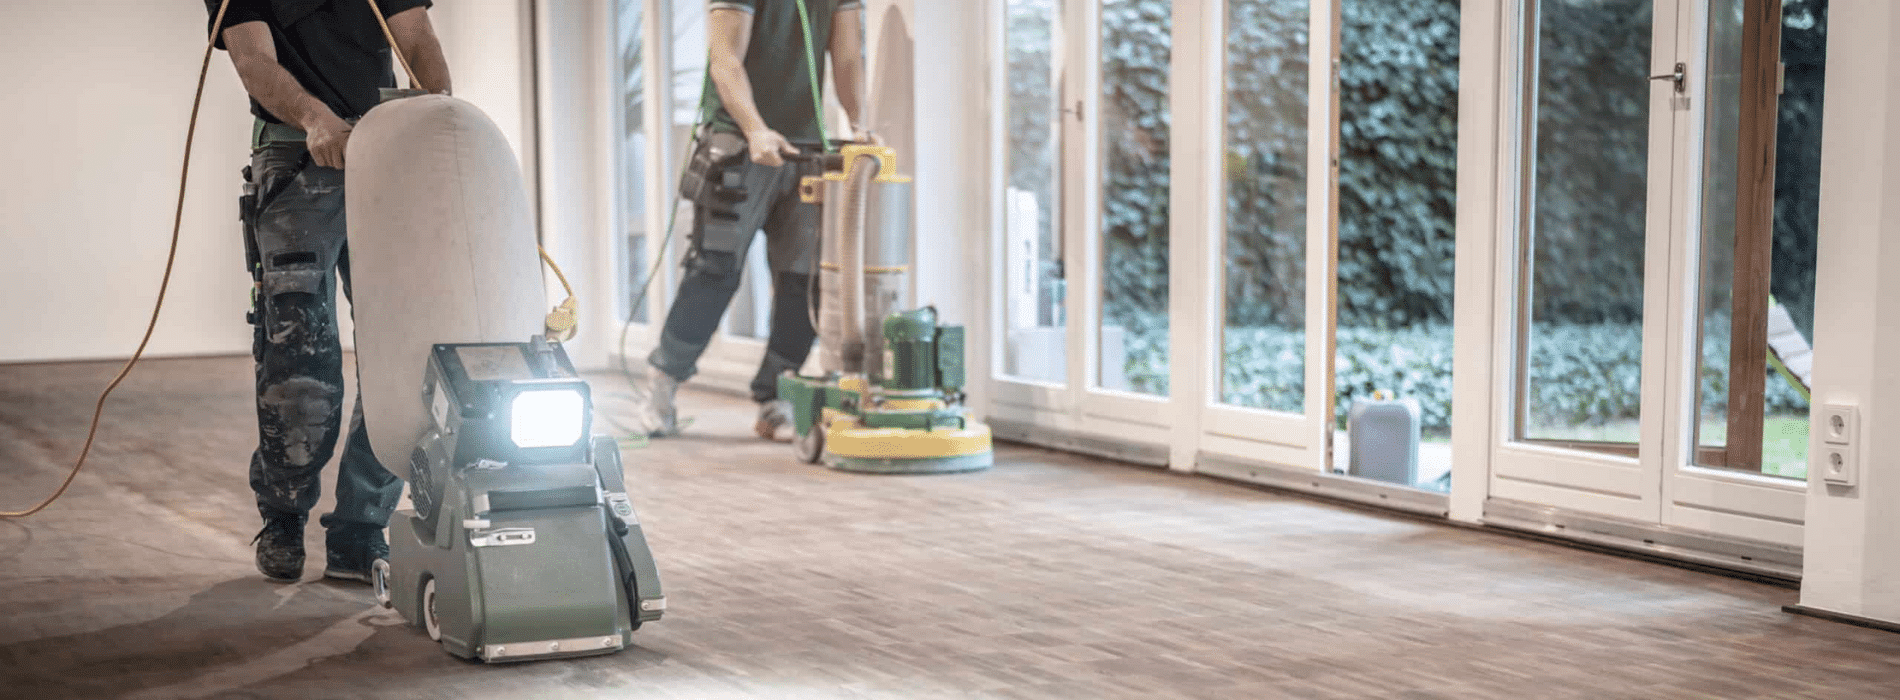 In Barnes, SW13, Mr Sander® skillfully sanding a herringbone floor using the powerful 2.2 kW Bona belt sander. The 220V, 60Hz machine, sized 250x750 mm, creates stunning results while the HEPA-filtered dust extraction system ensures cleanliness and efficiency.